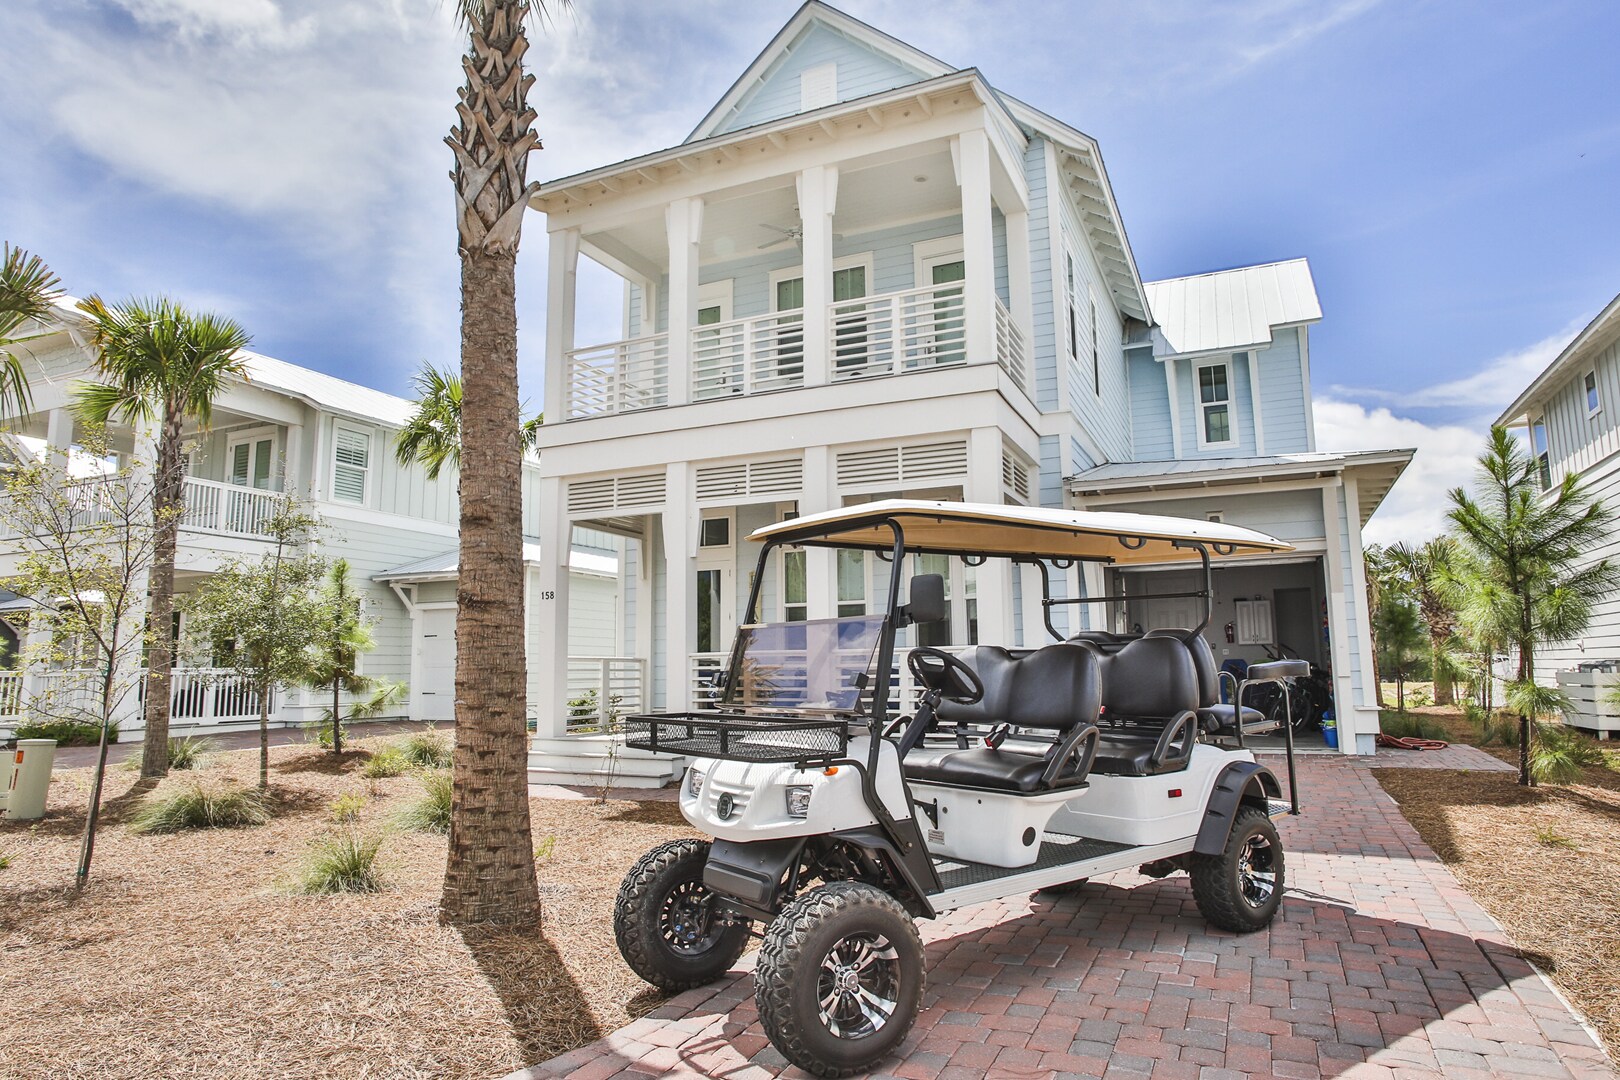 Prominence on 30A - Seaglass - Golf Cart Included!